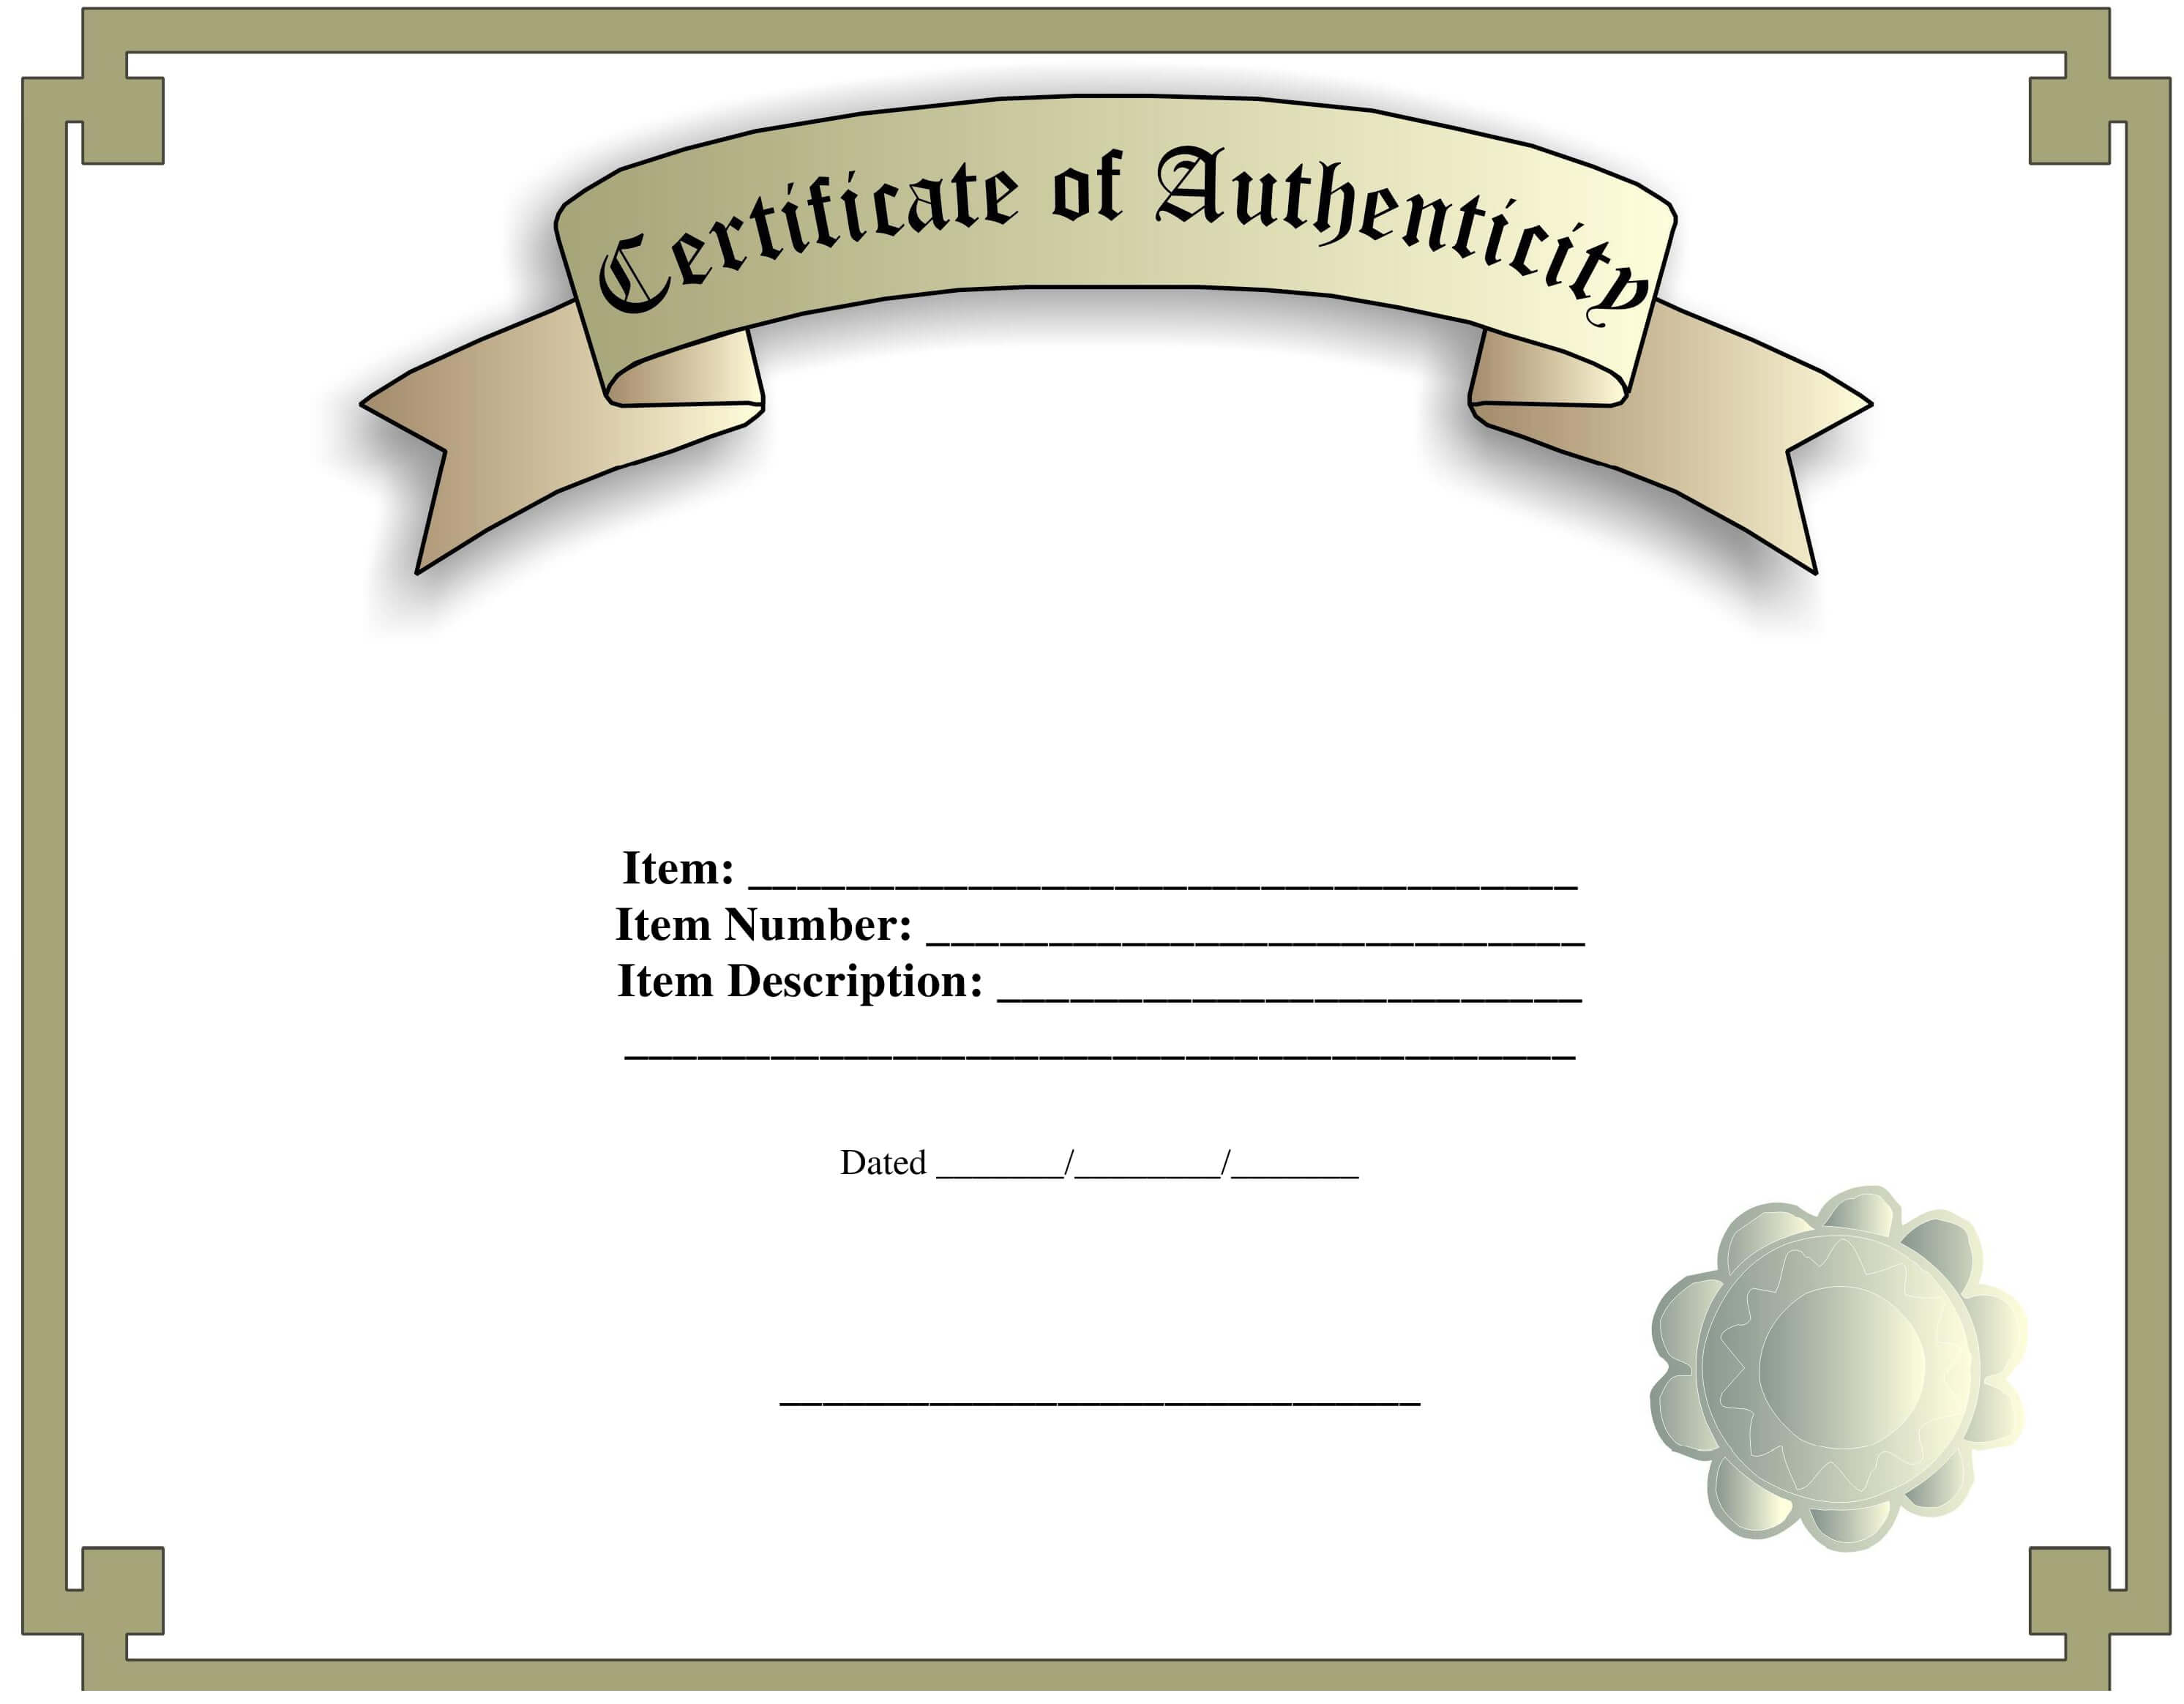 Certificate Of Authenticity Template | Templates At For Certificate Of Authenticity Template